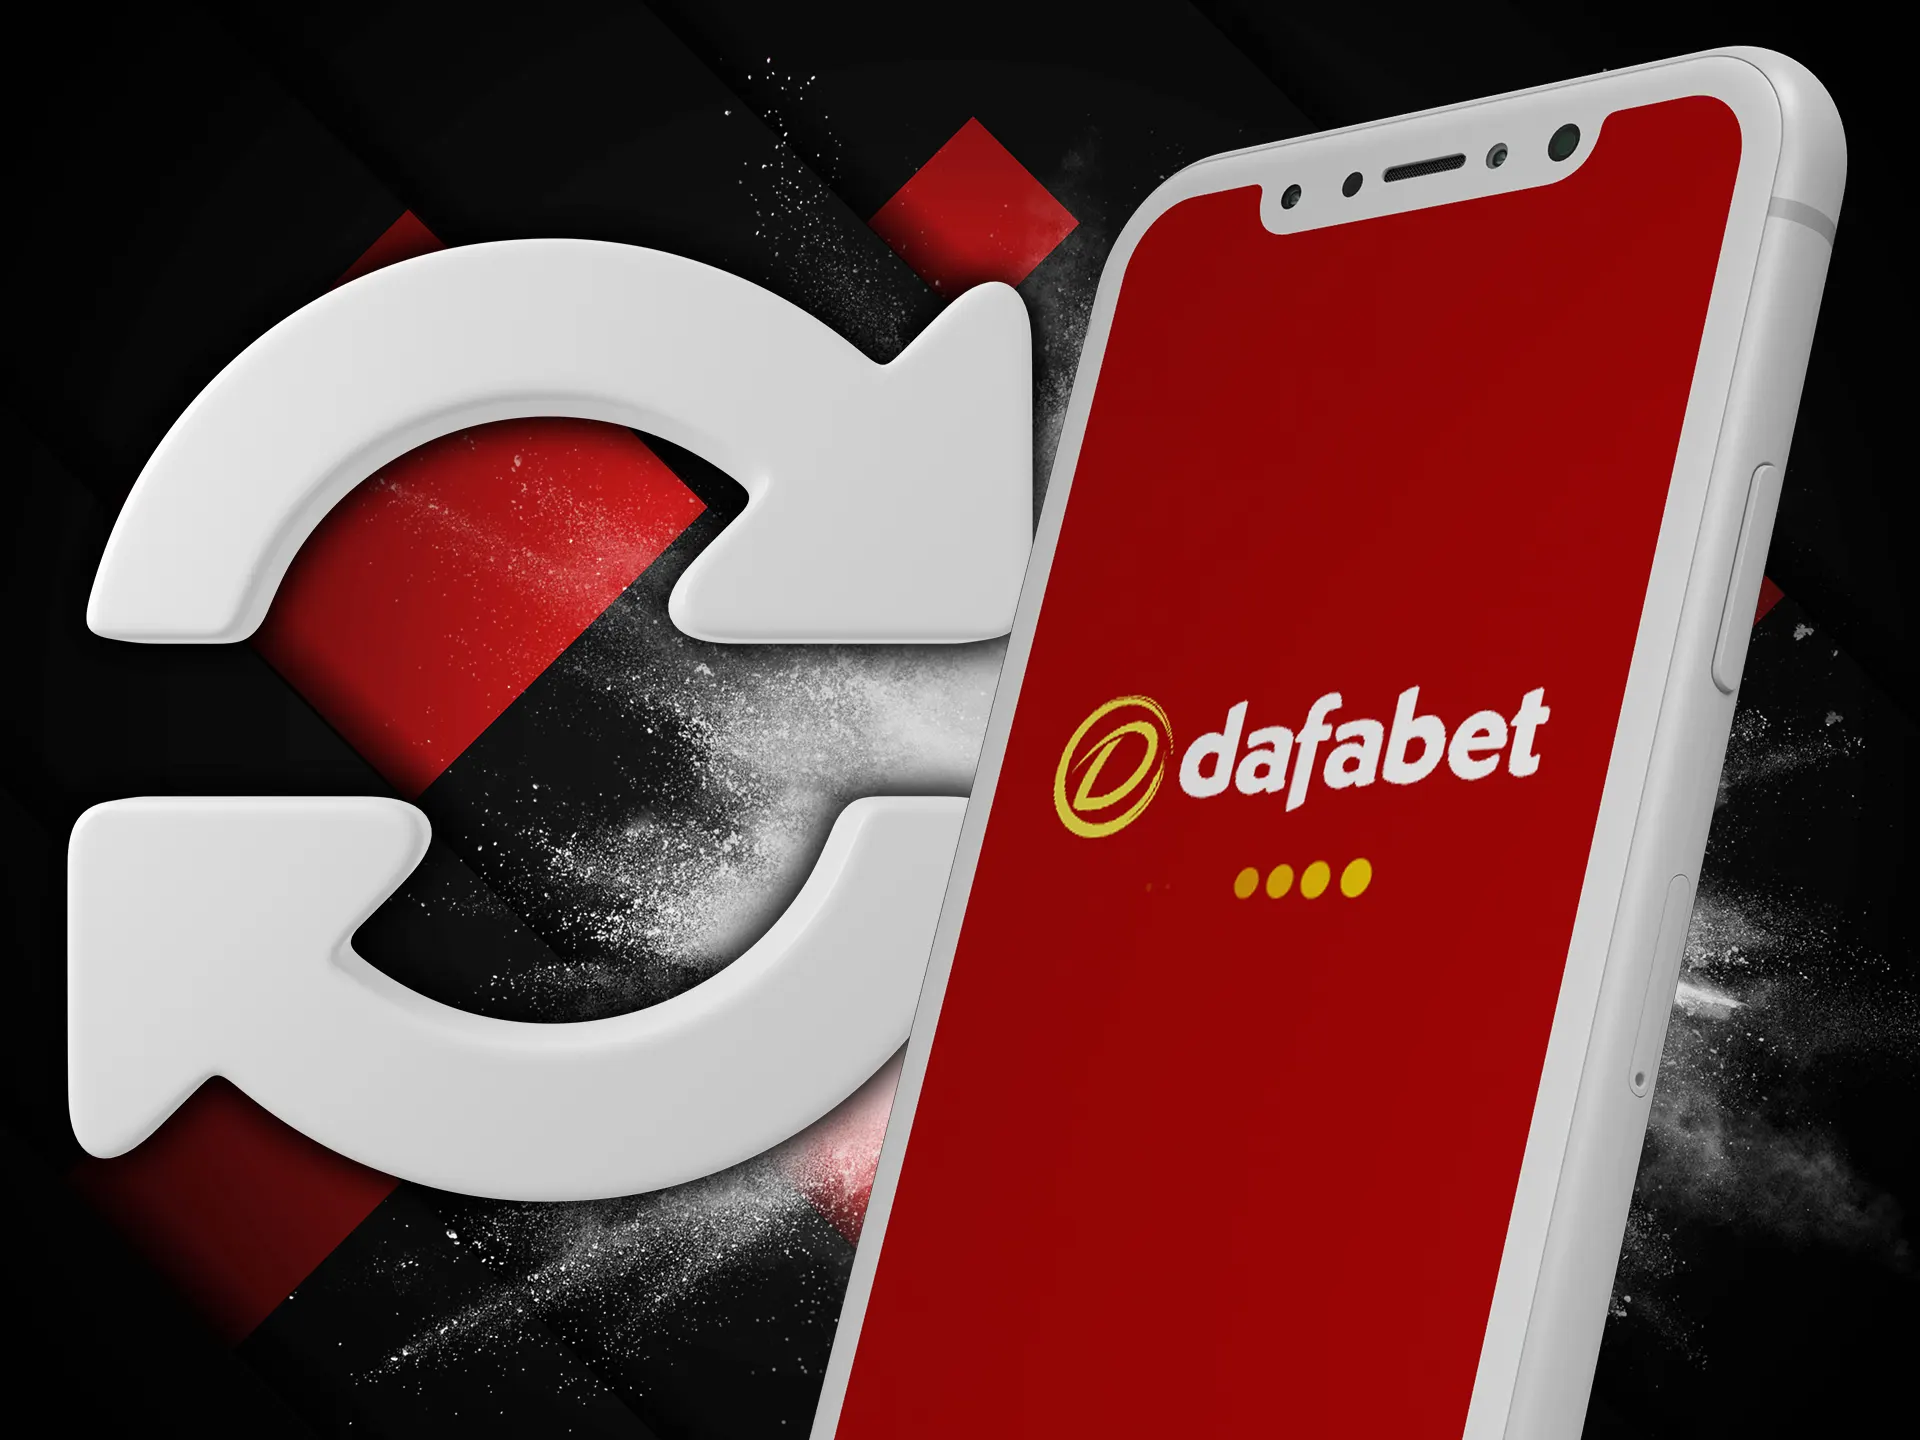 Dafabet app updates automatically after logging in.